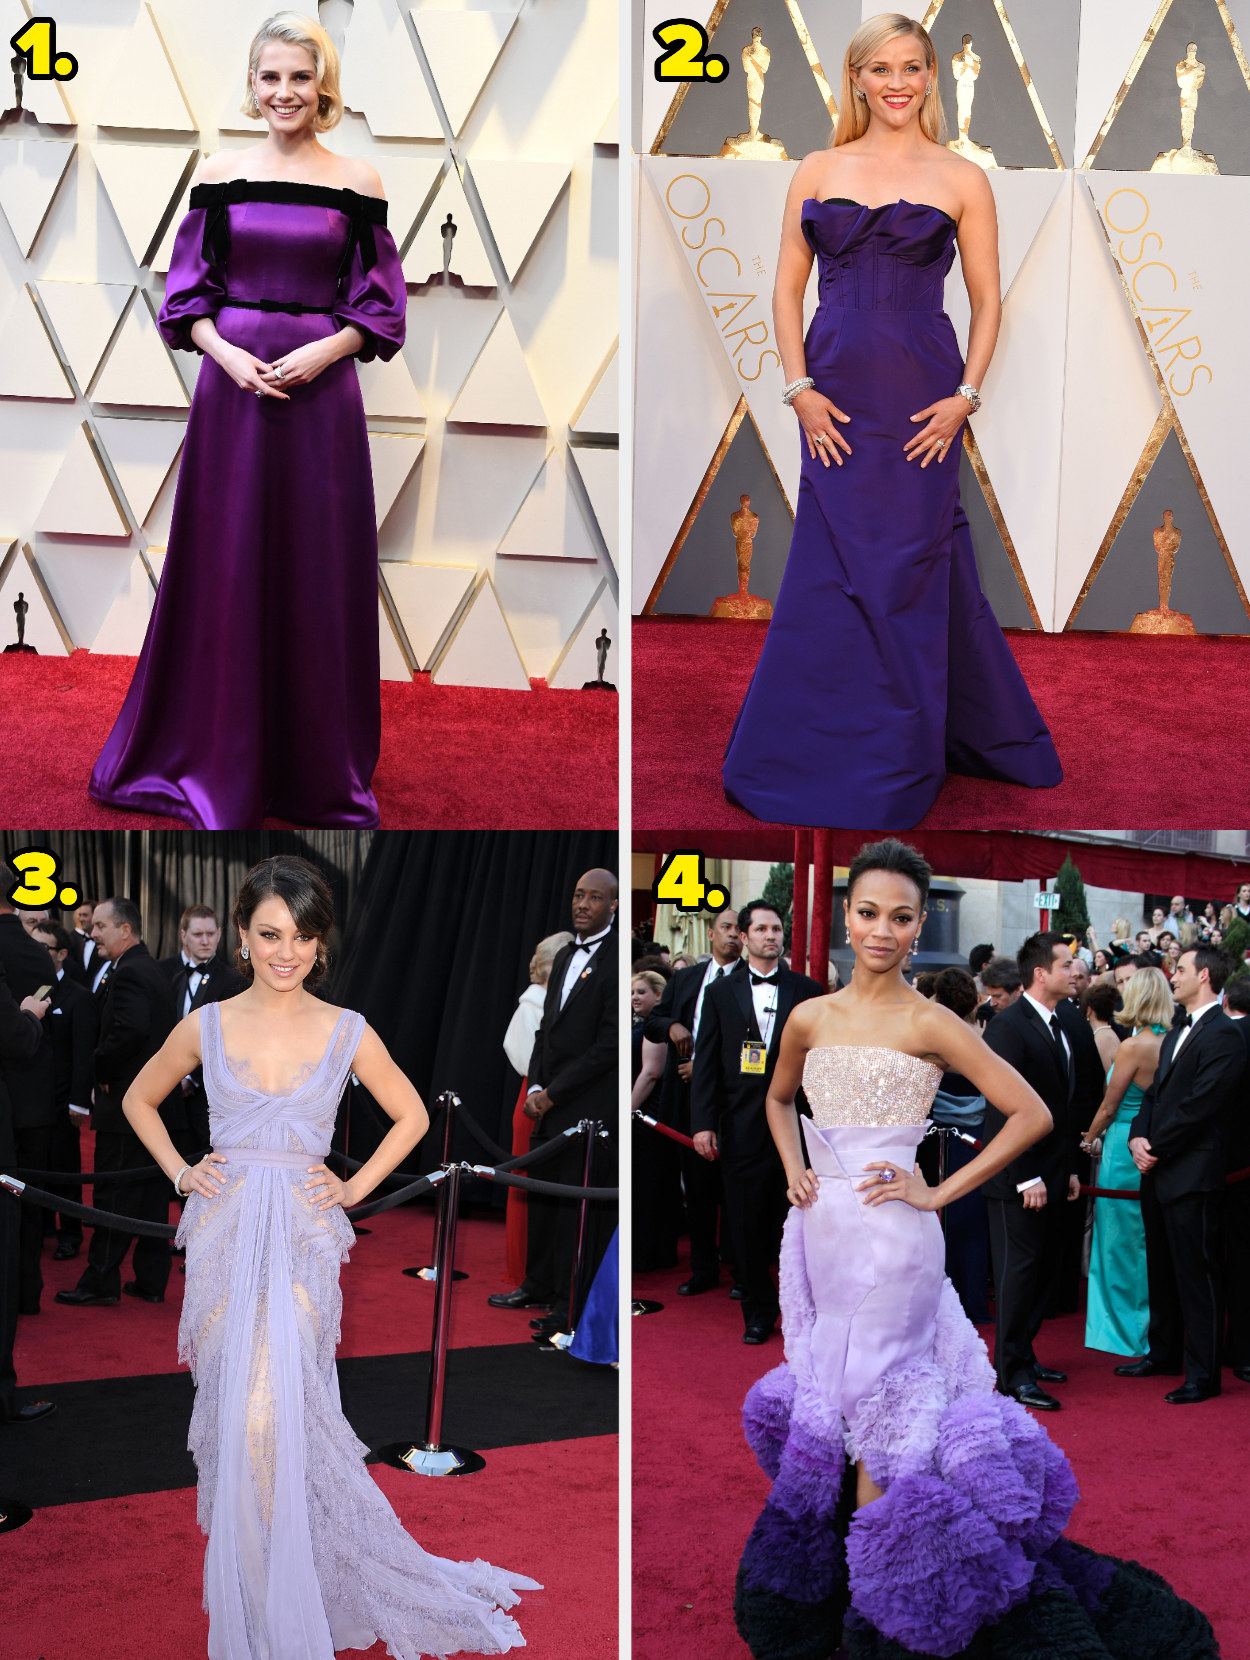 1. Lucy Boynton wears an off the shoulder gown 2. Reese Witherspoon wears a strapless gown. 3. Mila Kunis wears a scoop neck gown with tiered lace. 4. Zoe Saldana wears a strapless gown with giant puffballs at the bottom